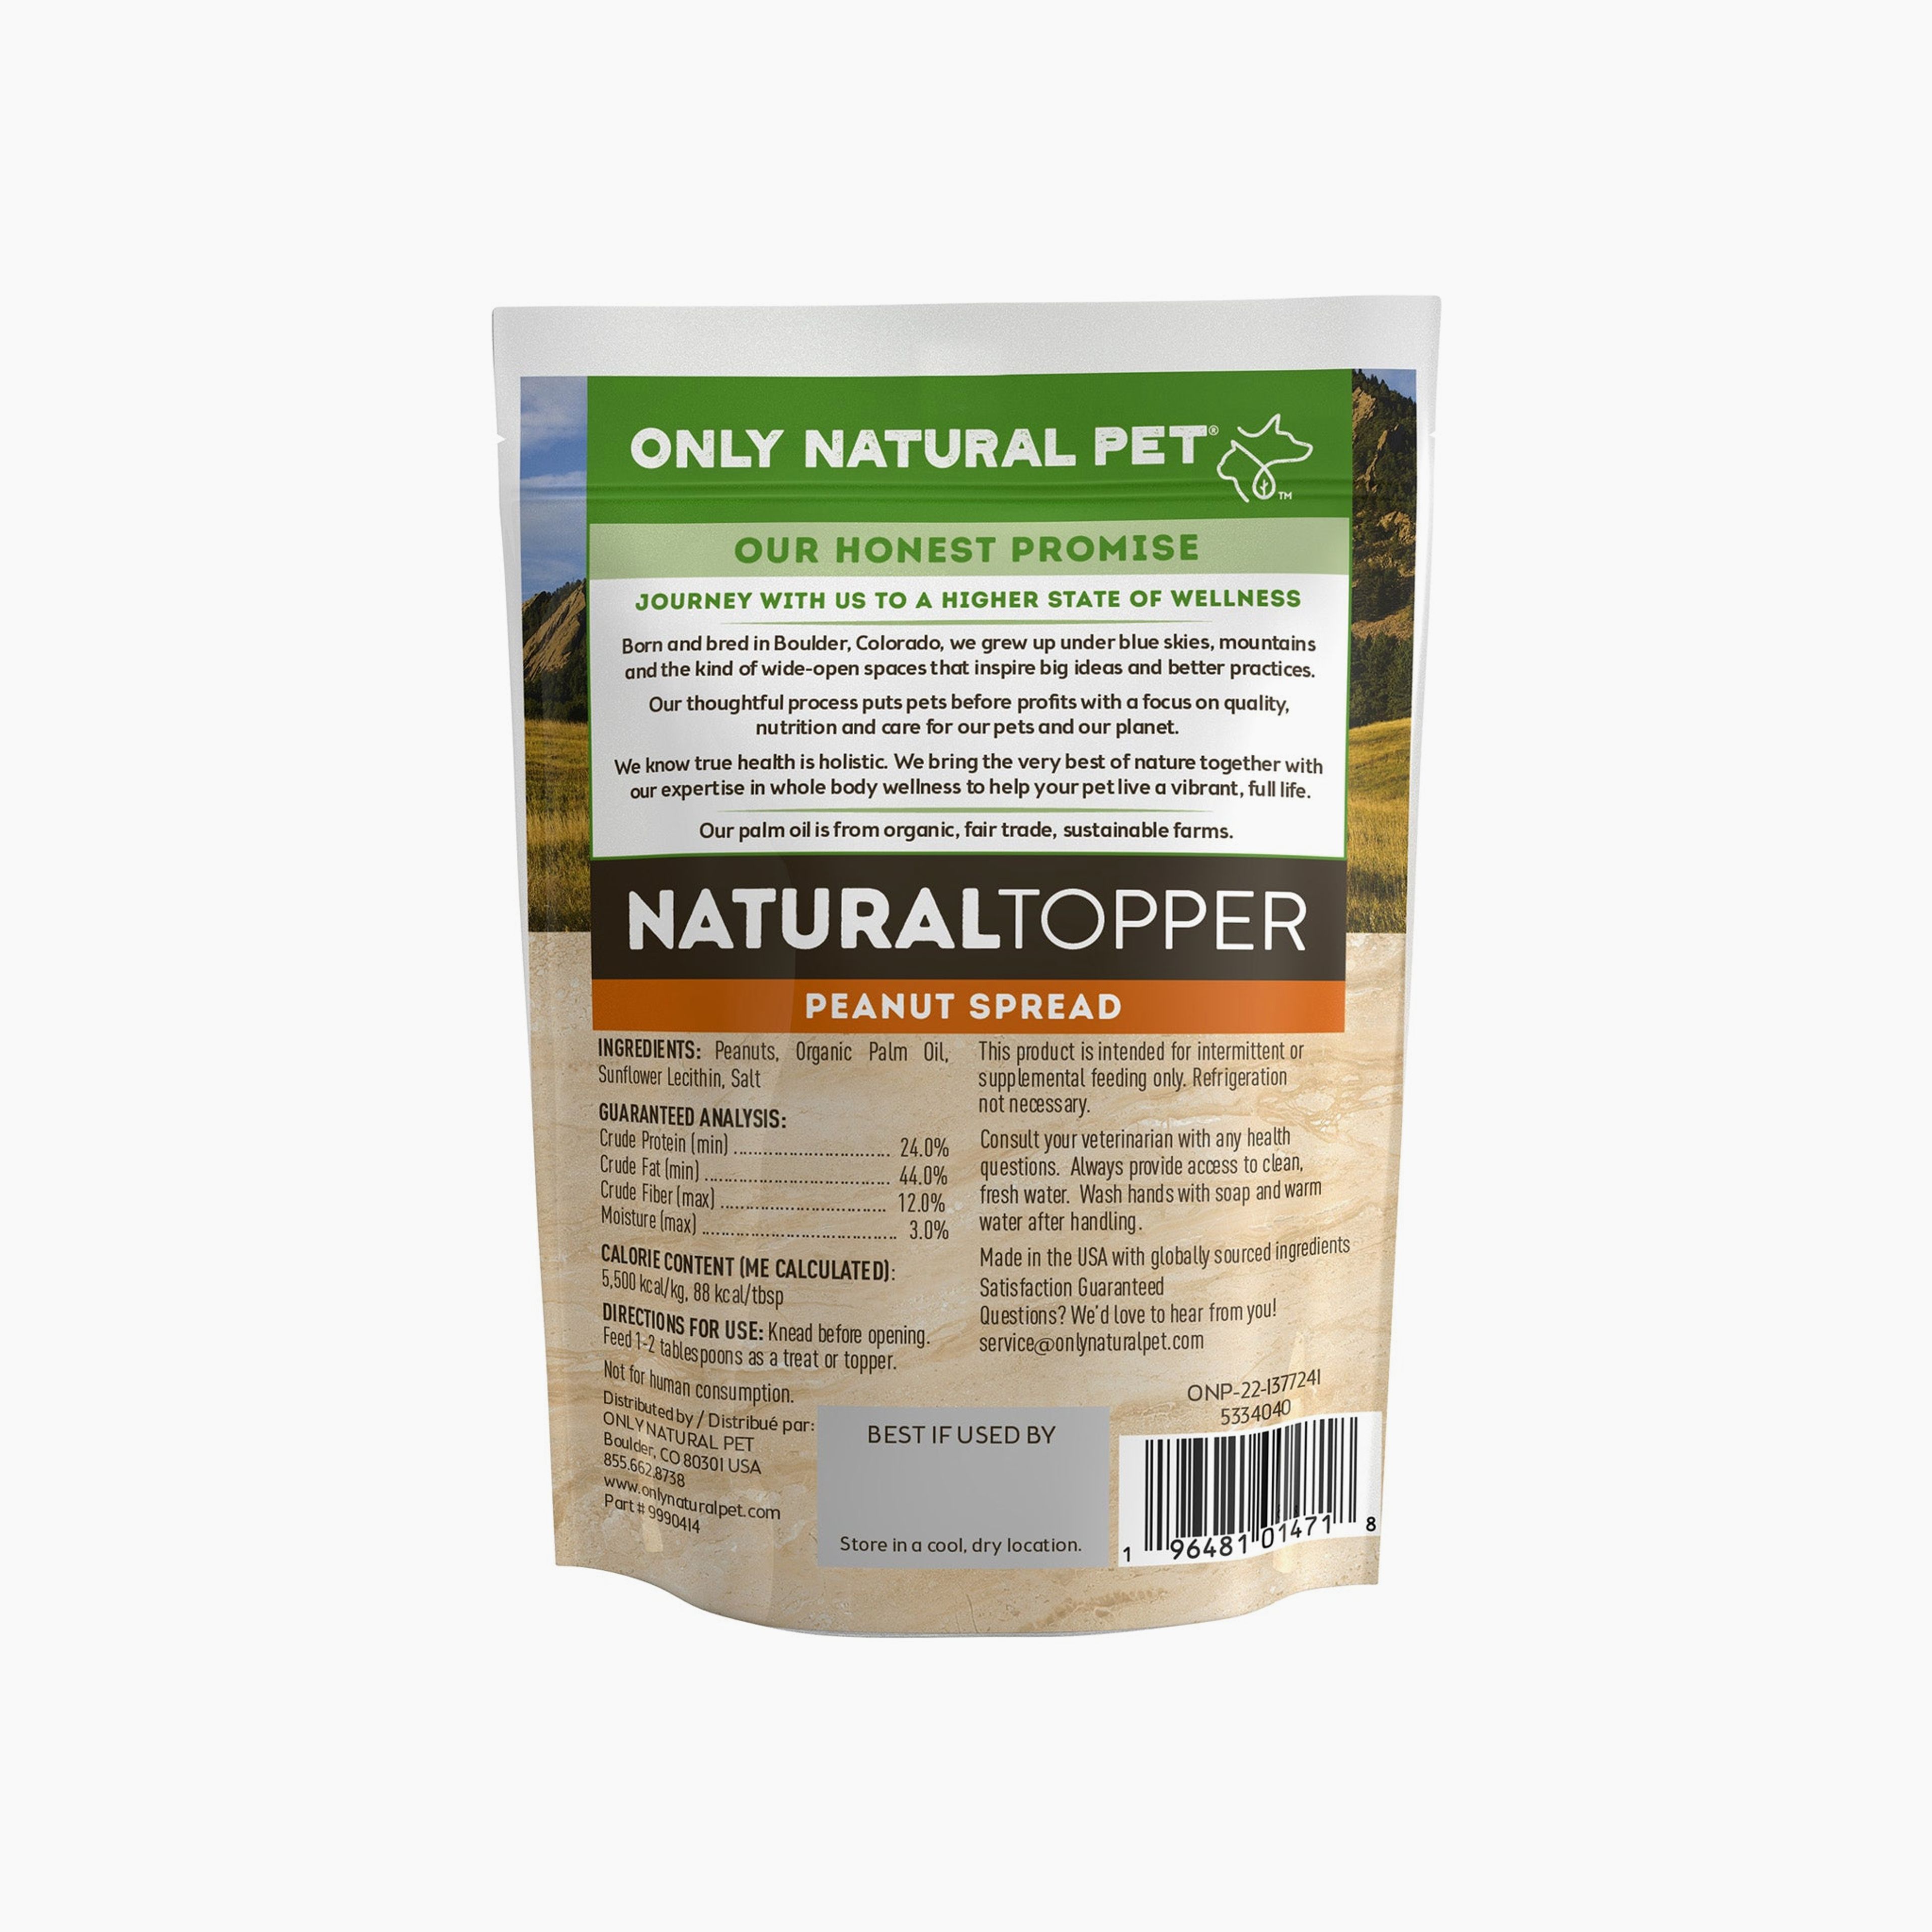 Only Natural Pet Natural Topper Peanut Spread Meal Topper for Dogs